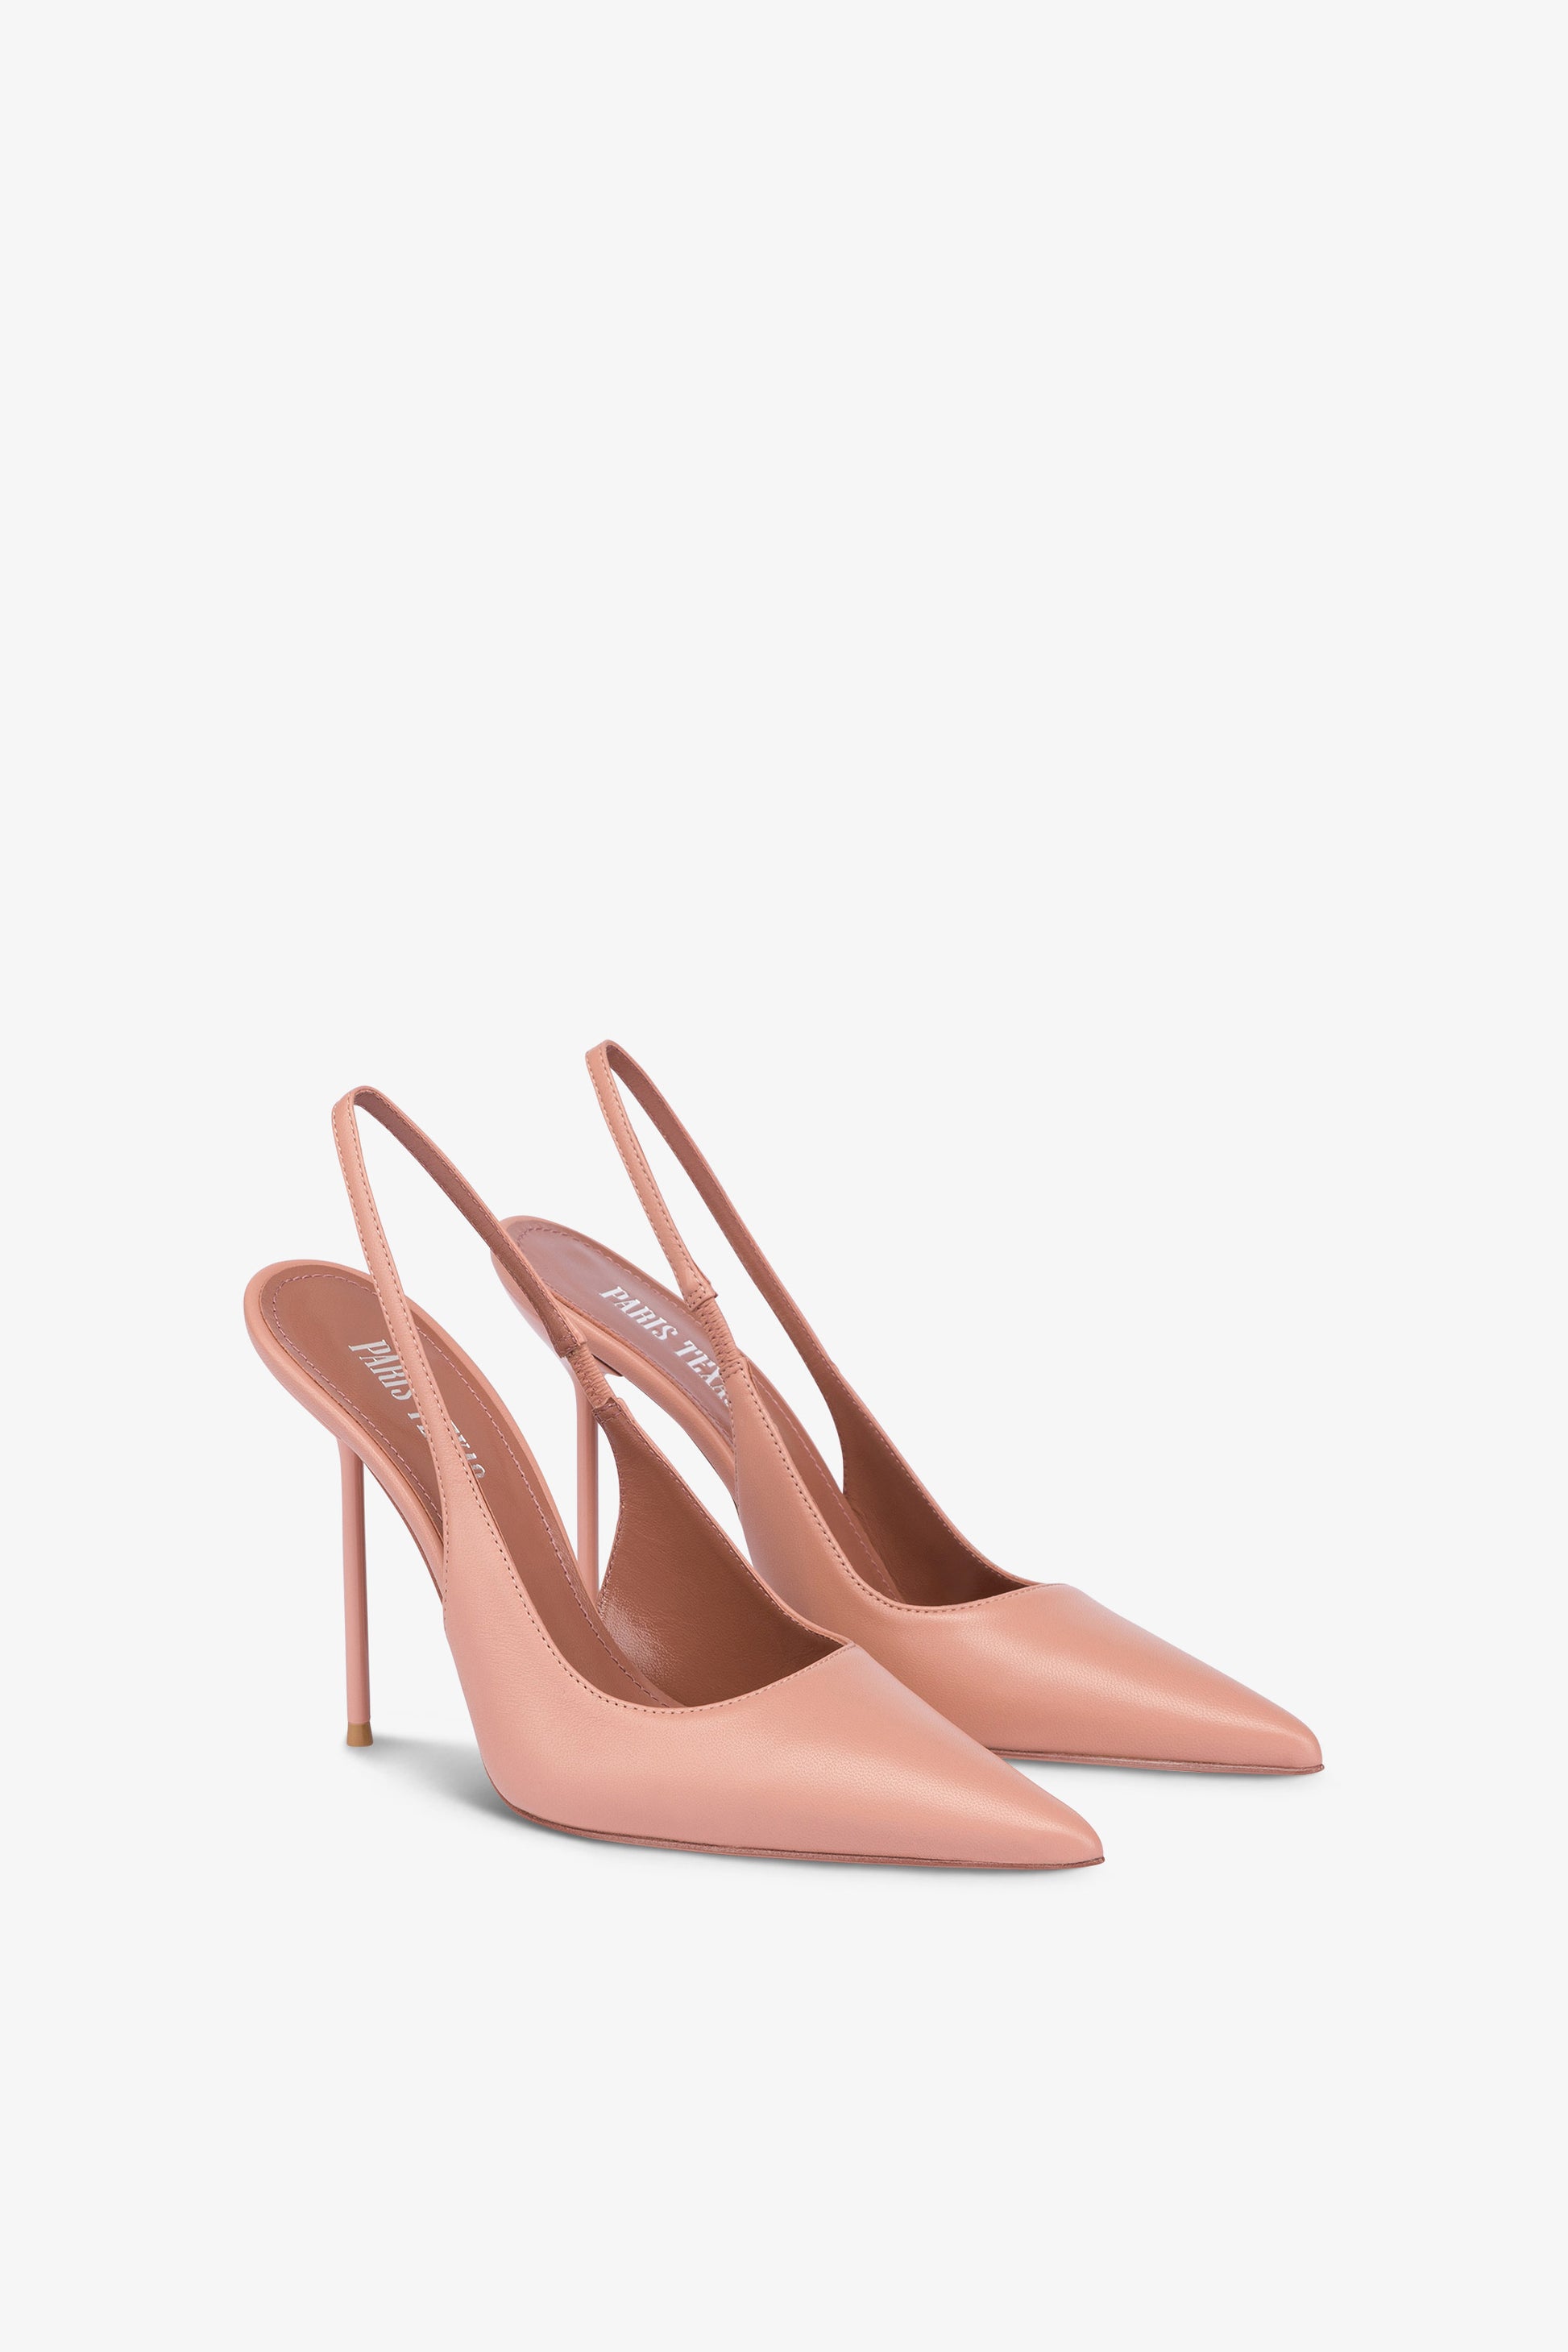 Sharp, pointed slingbacks in smooth romance leather